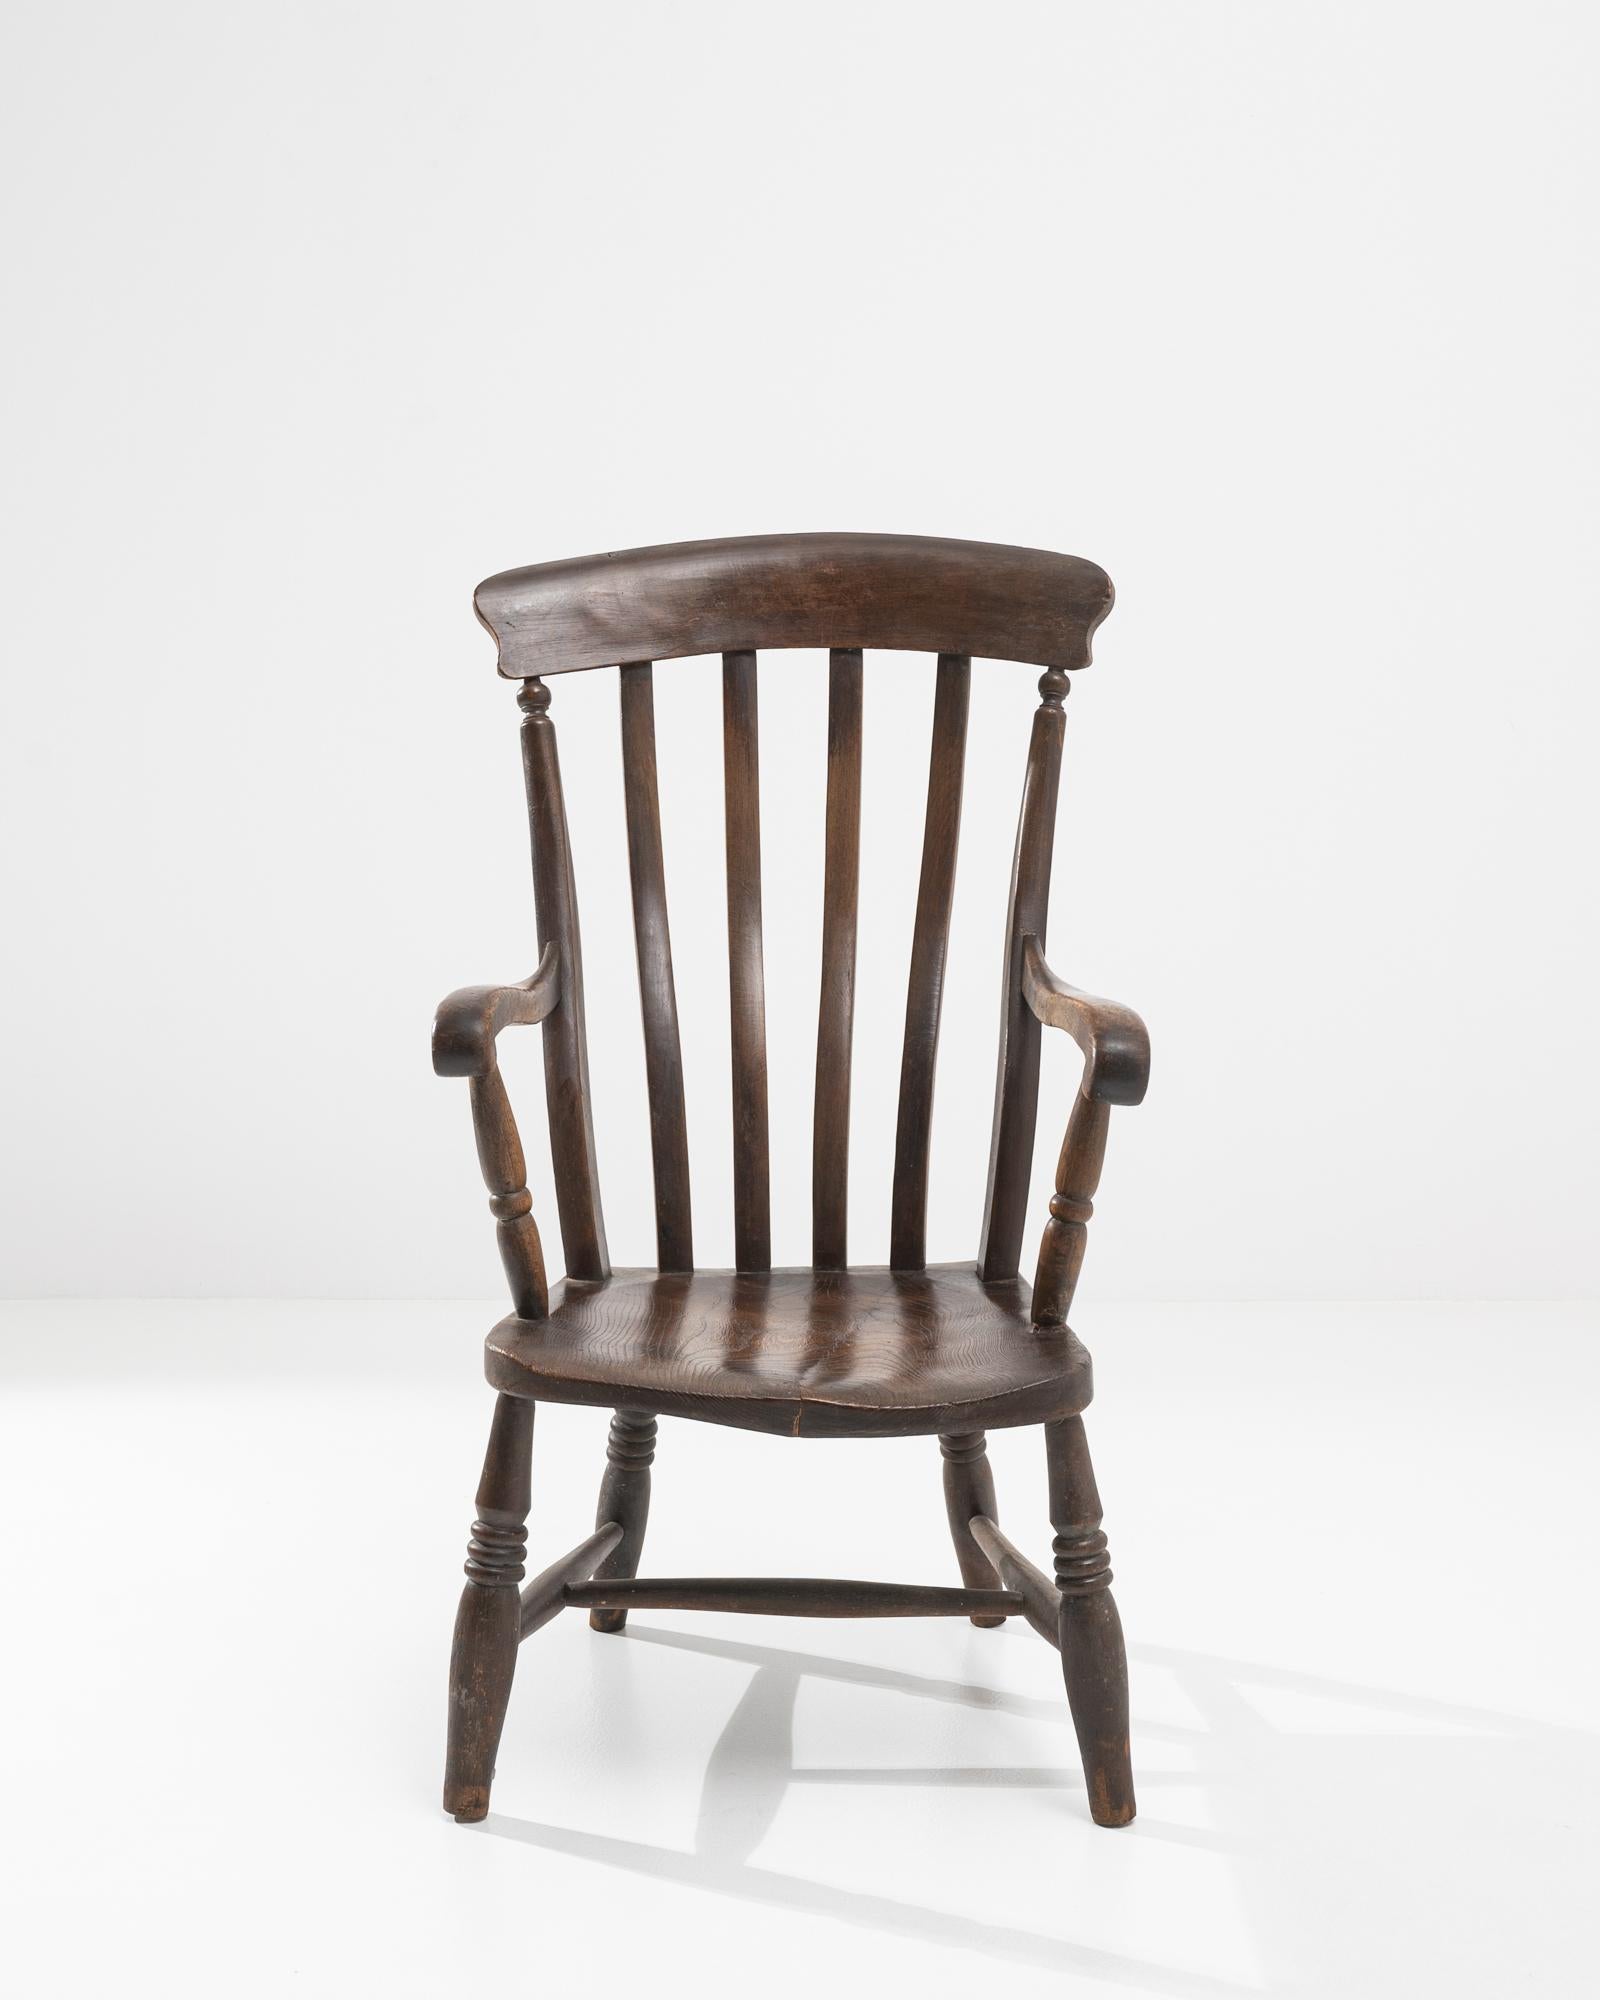 Tapering and waving spindles above sloping arm rails and lathed legs give this chair a poetic character. Made in France circa 1920, the wood has retained its original finish. The right-angled, upright seat is softened with an ergonomic contour and